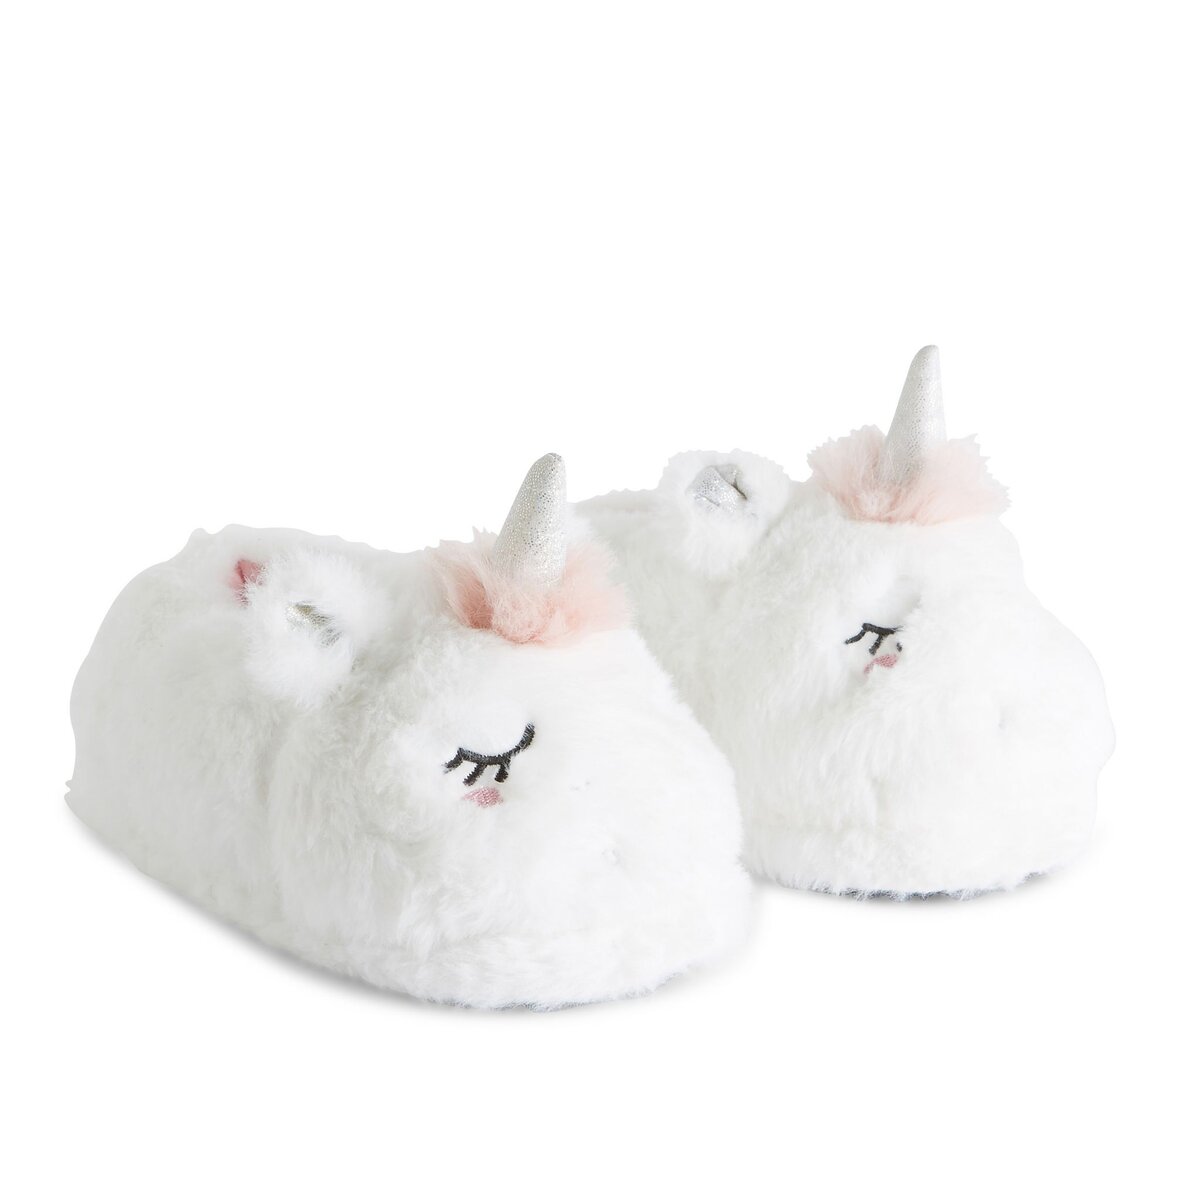 IN EXTENSO Chaussons licorne fille 